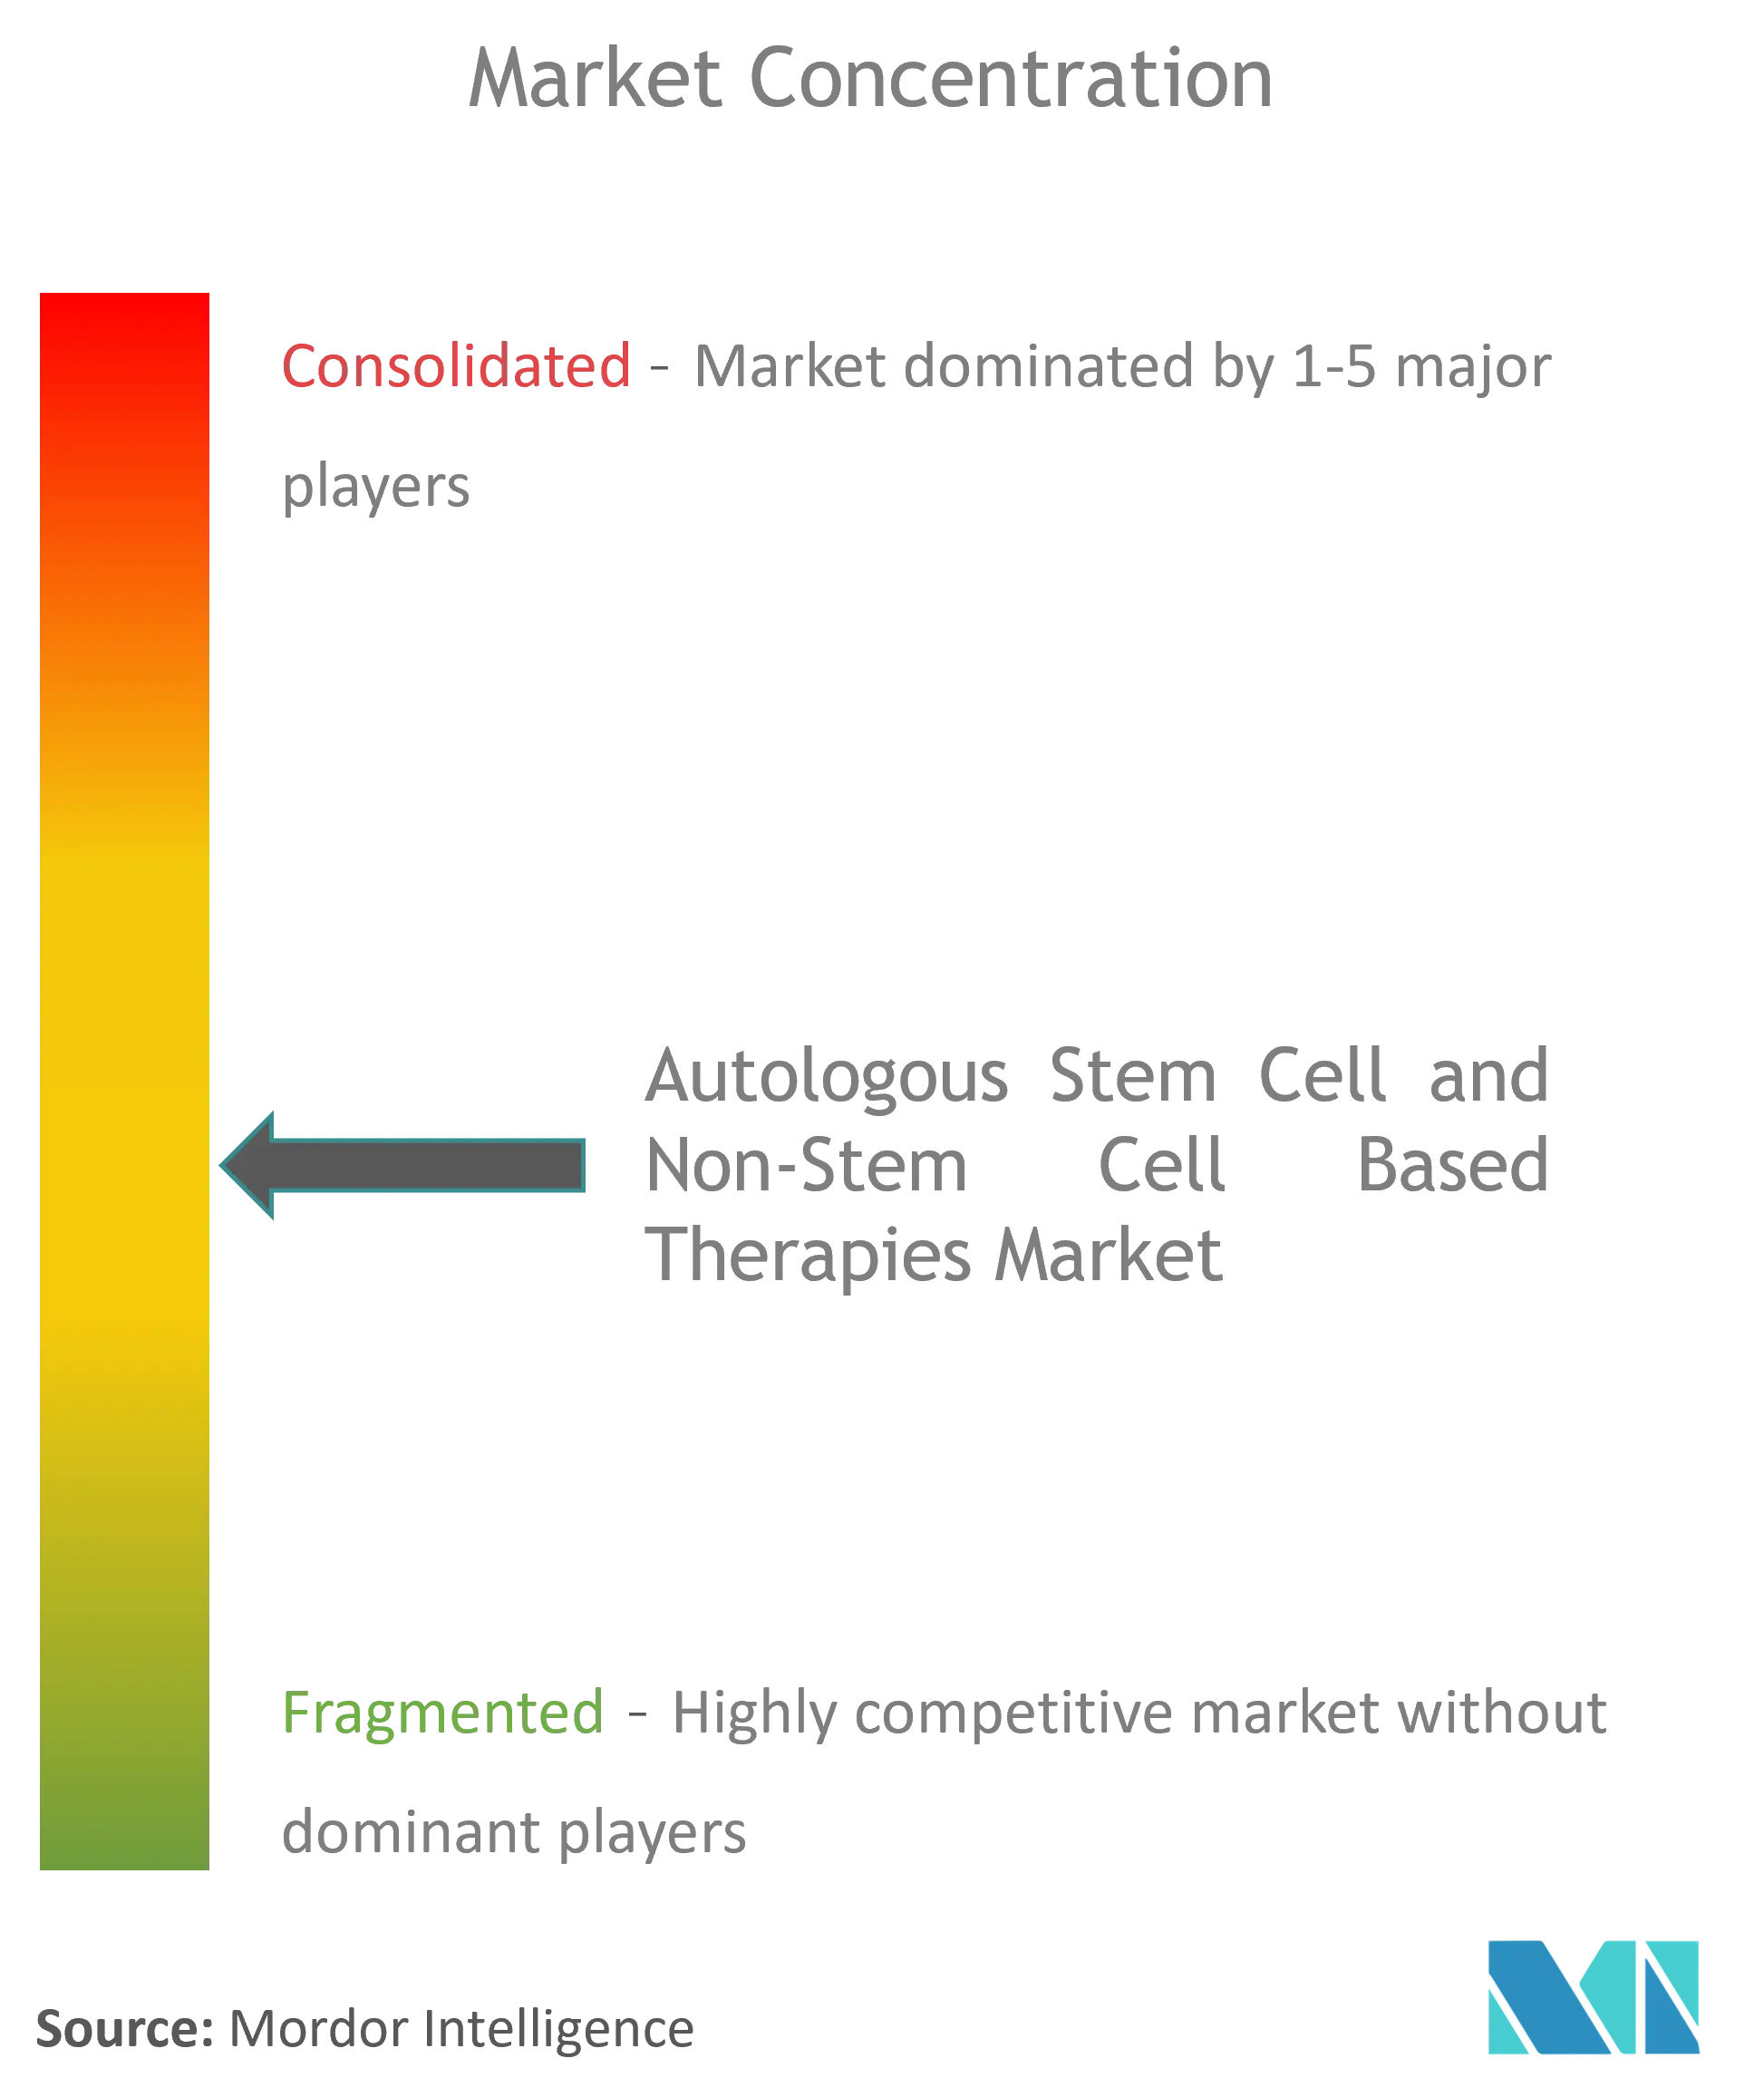 Autologous Stem Cell and Non-Stem Cell Based Therapies Market.png